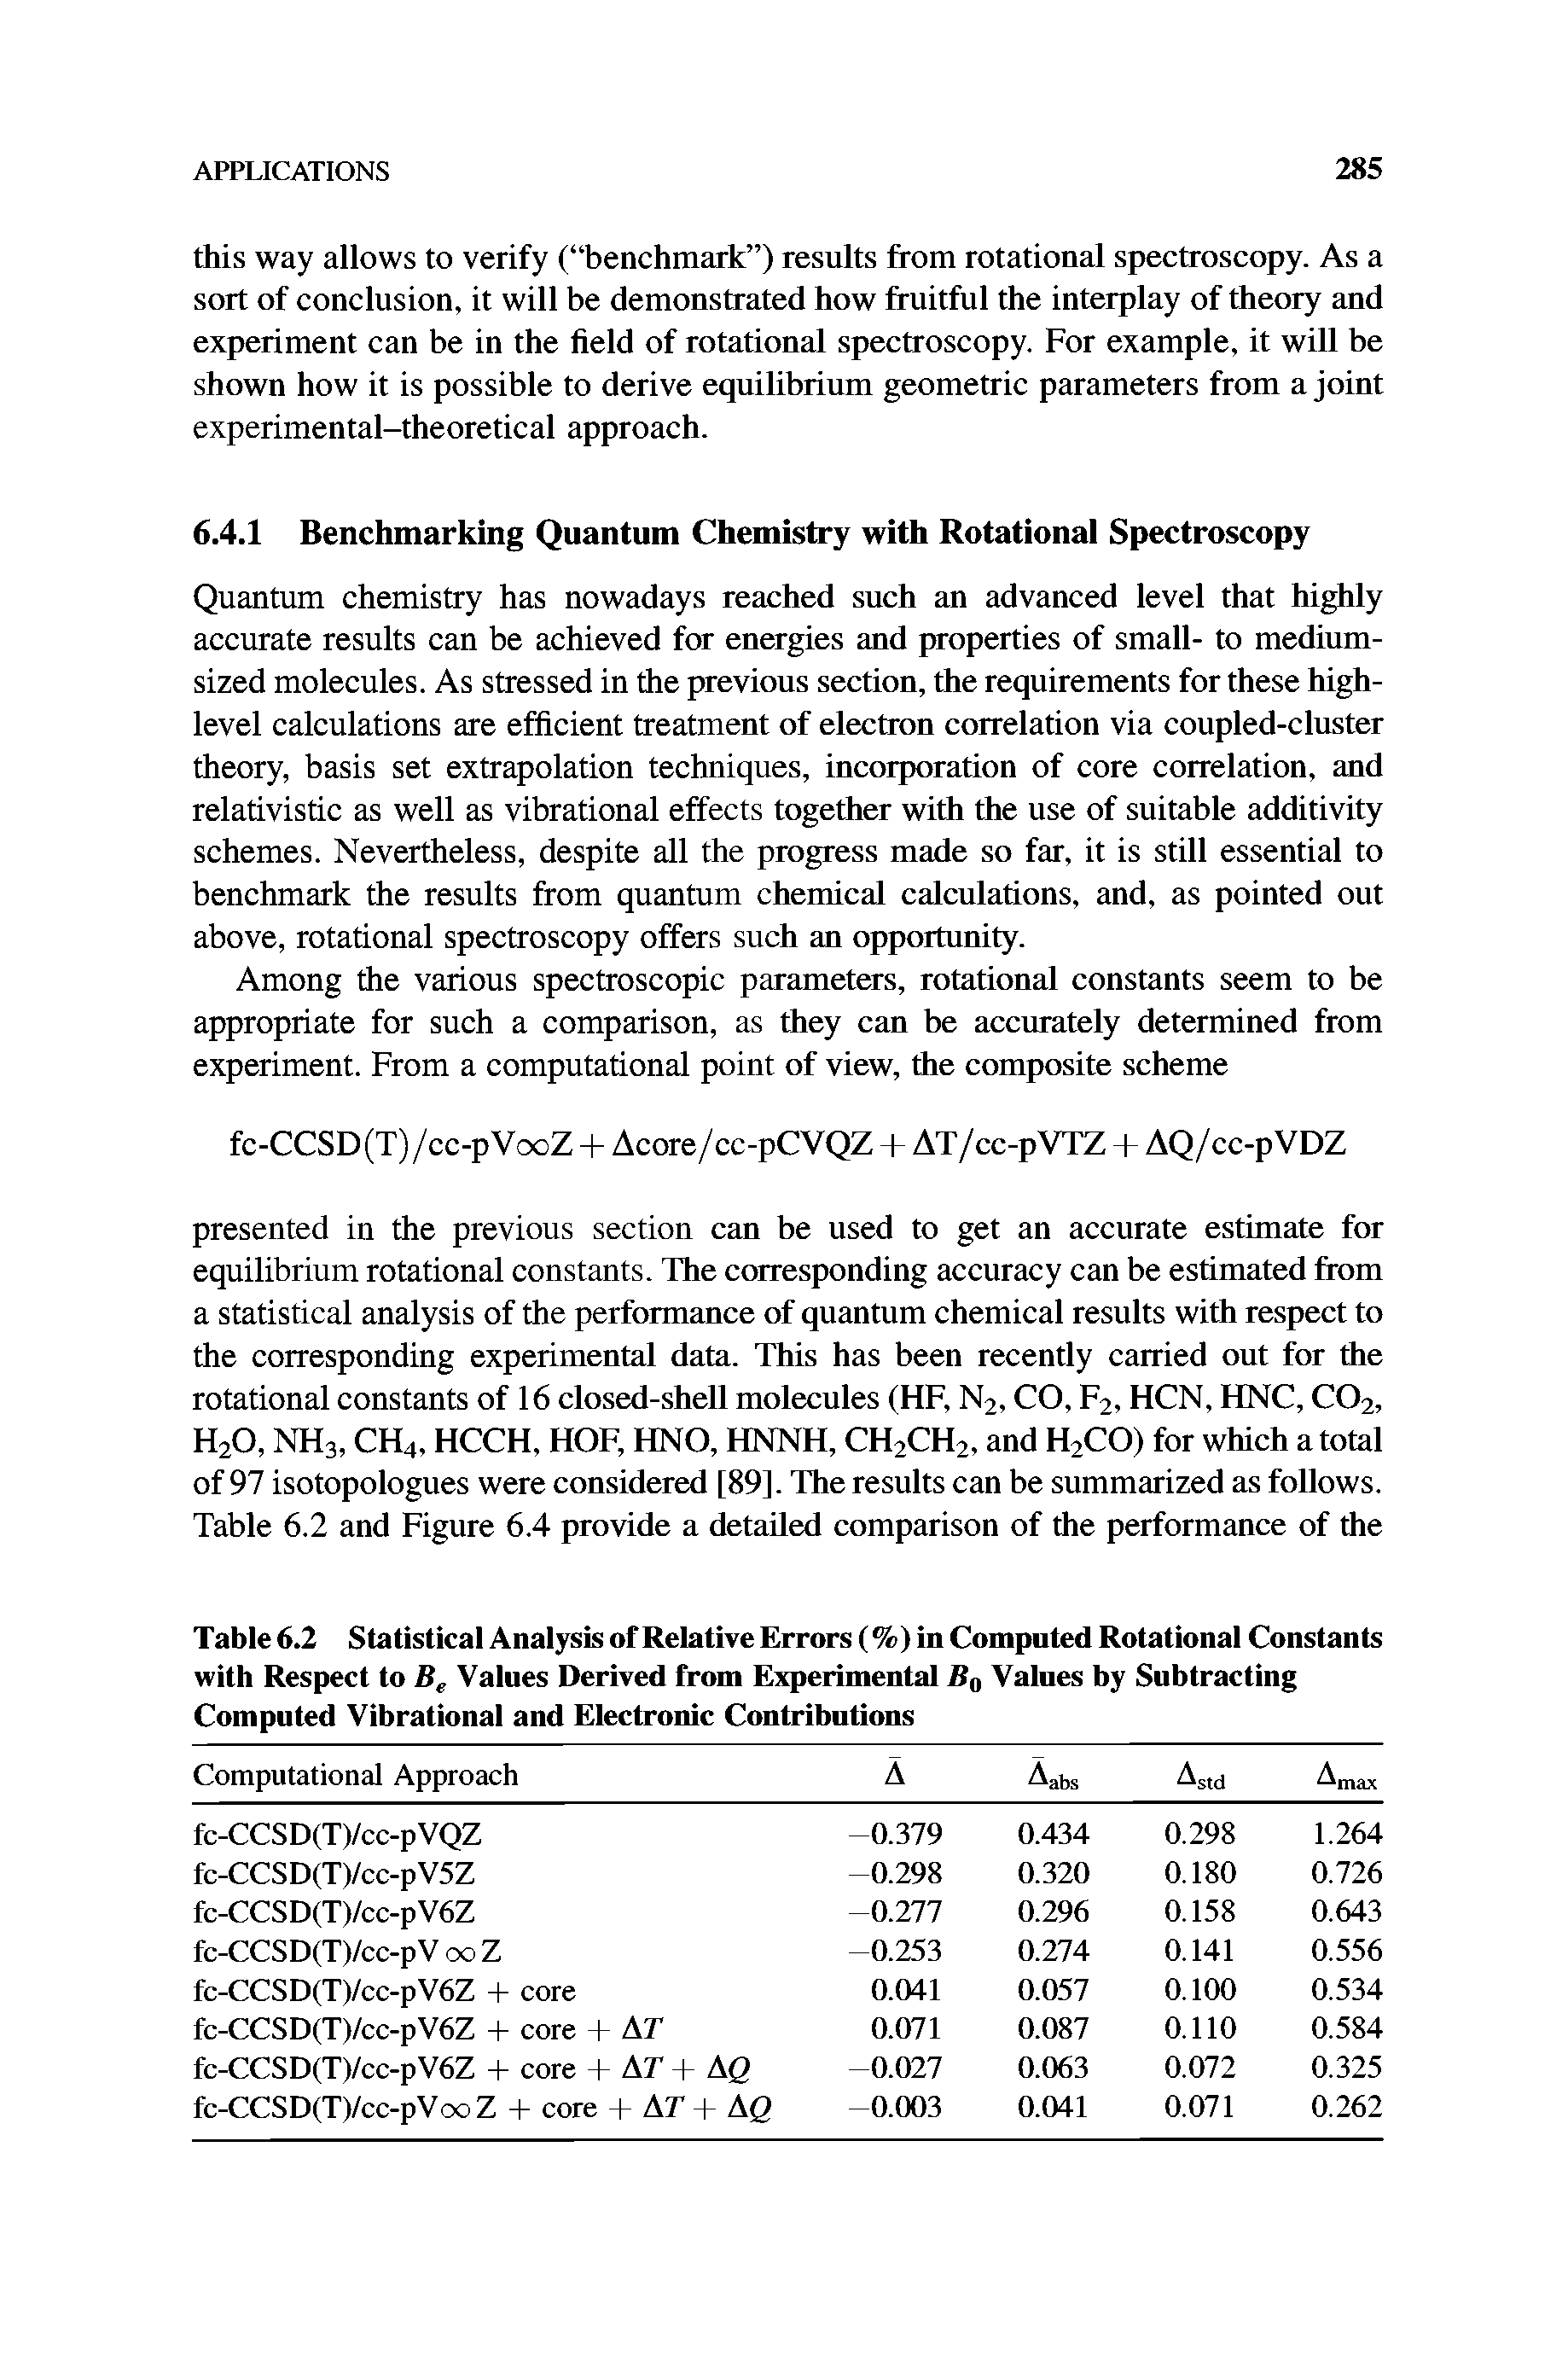 Table 6.2 Statistical Analysis of Relative Errors (%) in Computed Rotational Constants with Respect to Values Derived from Experimental Bq Values by Subtracting Computed Vibrational and Electronic Contributions...